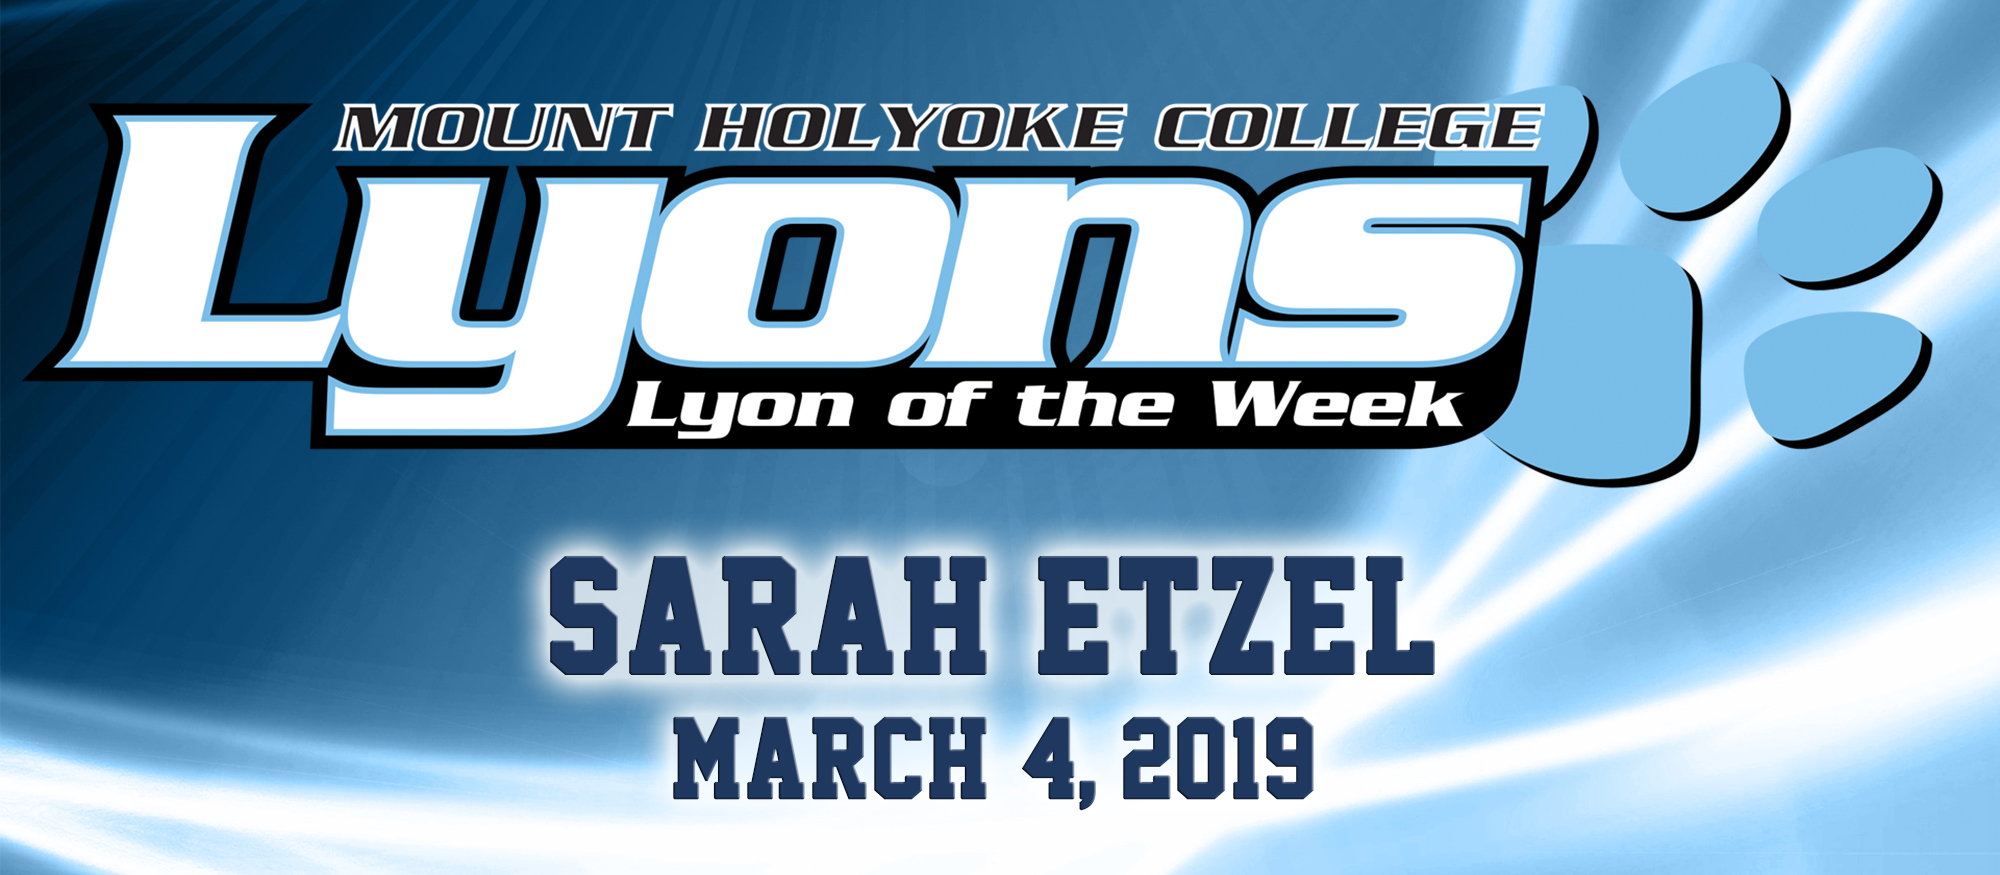 Photo for the Lyon of the Week for March 4, 2019, Riding's Sarah Etzel.